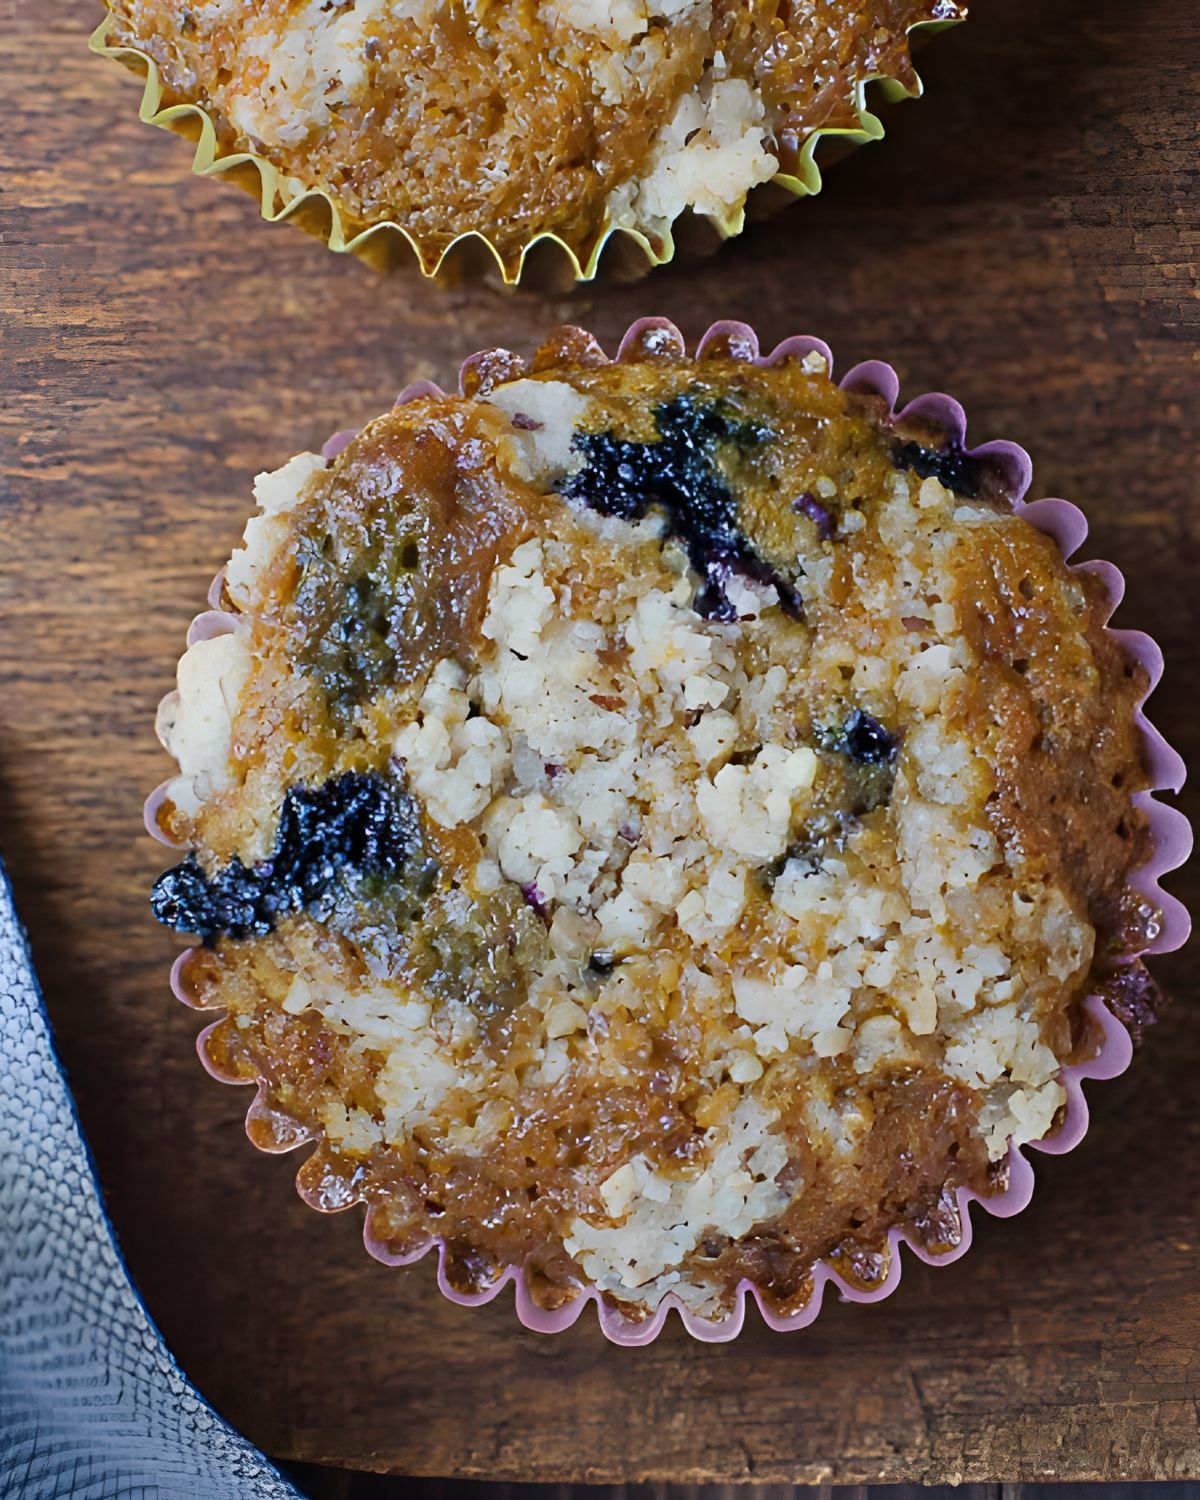 Glute free blueberry muffins.